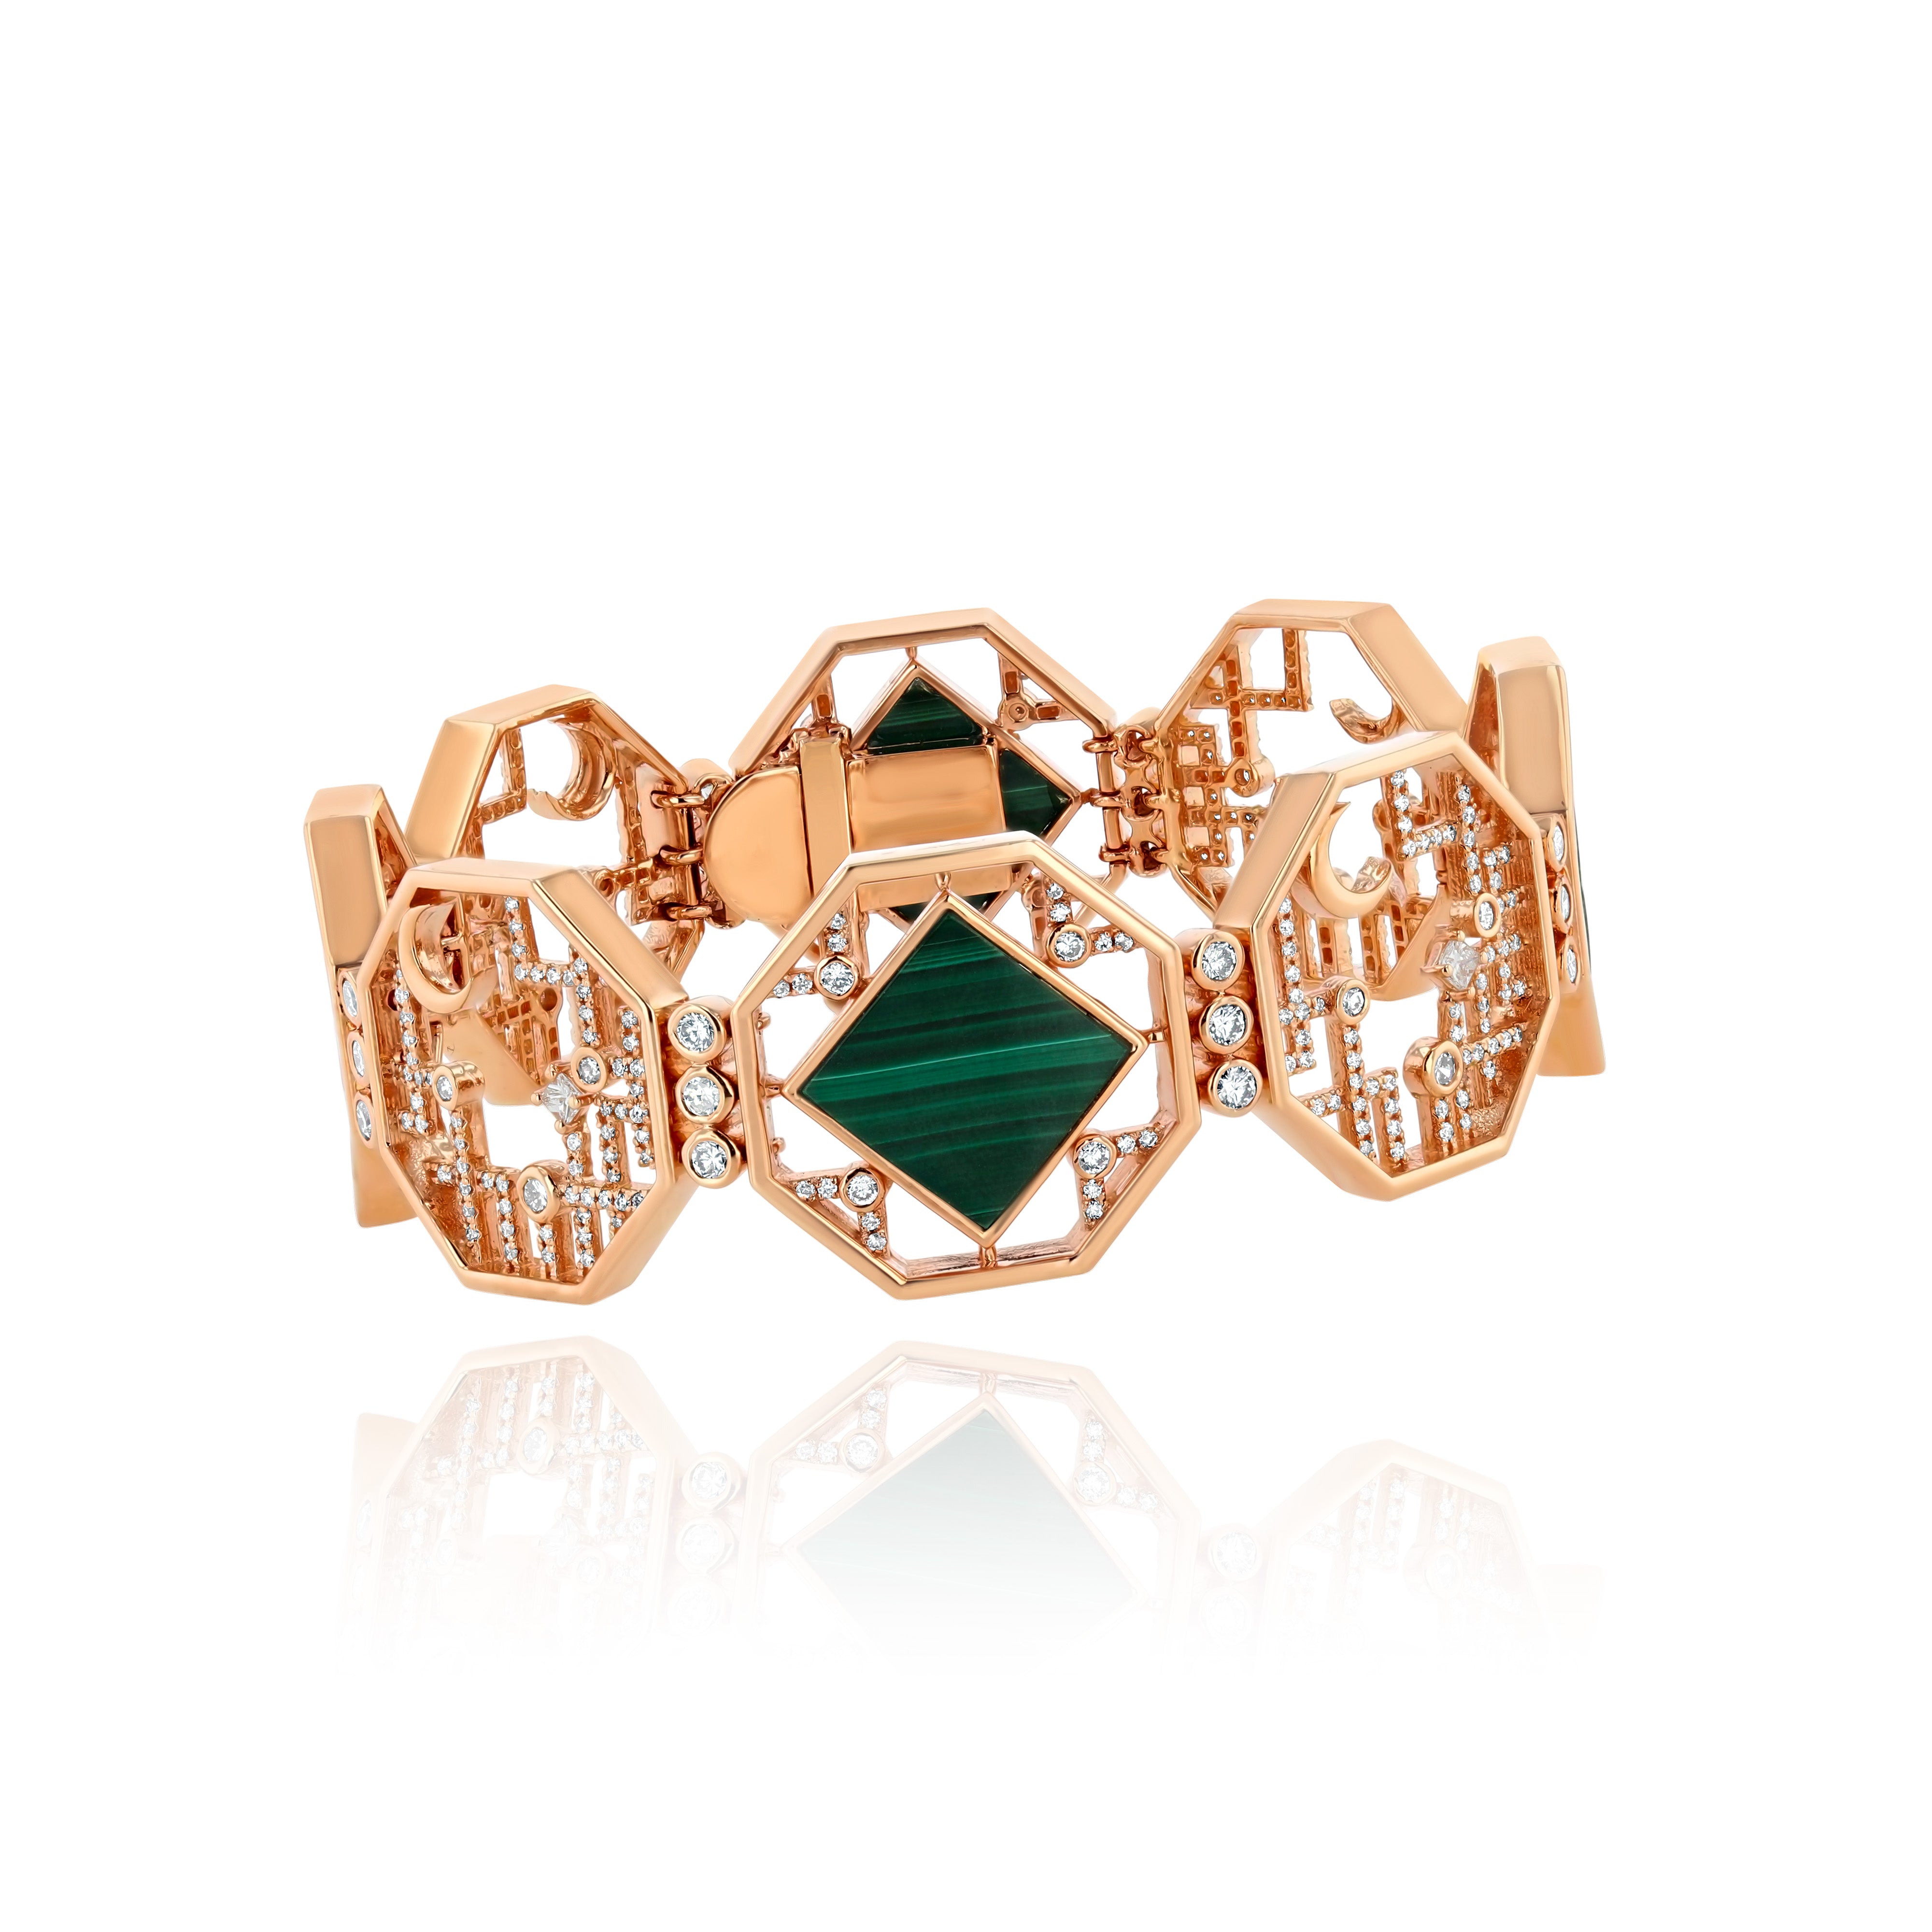 Rose Gold Bracelet of connected octagons with Diamonds and Malachite, Large